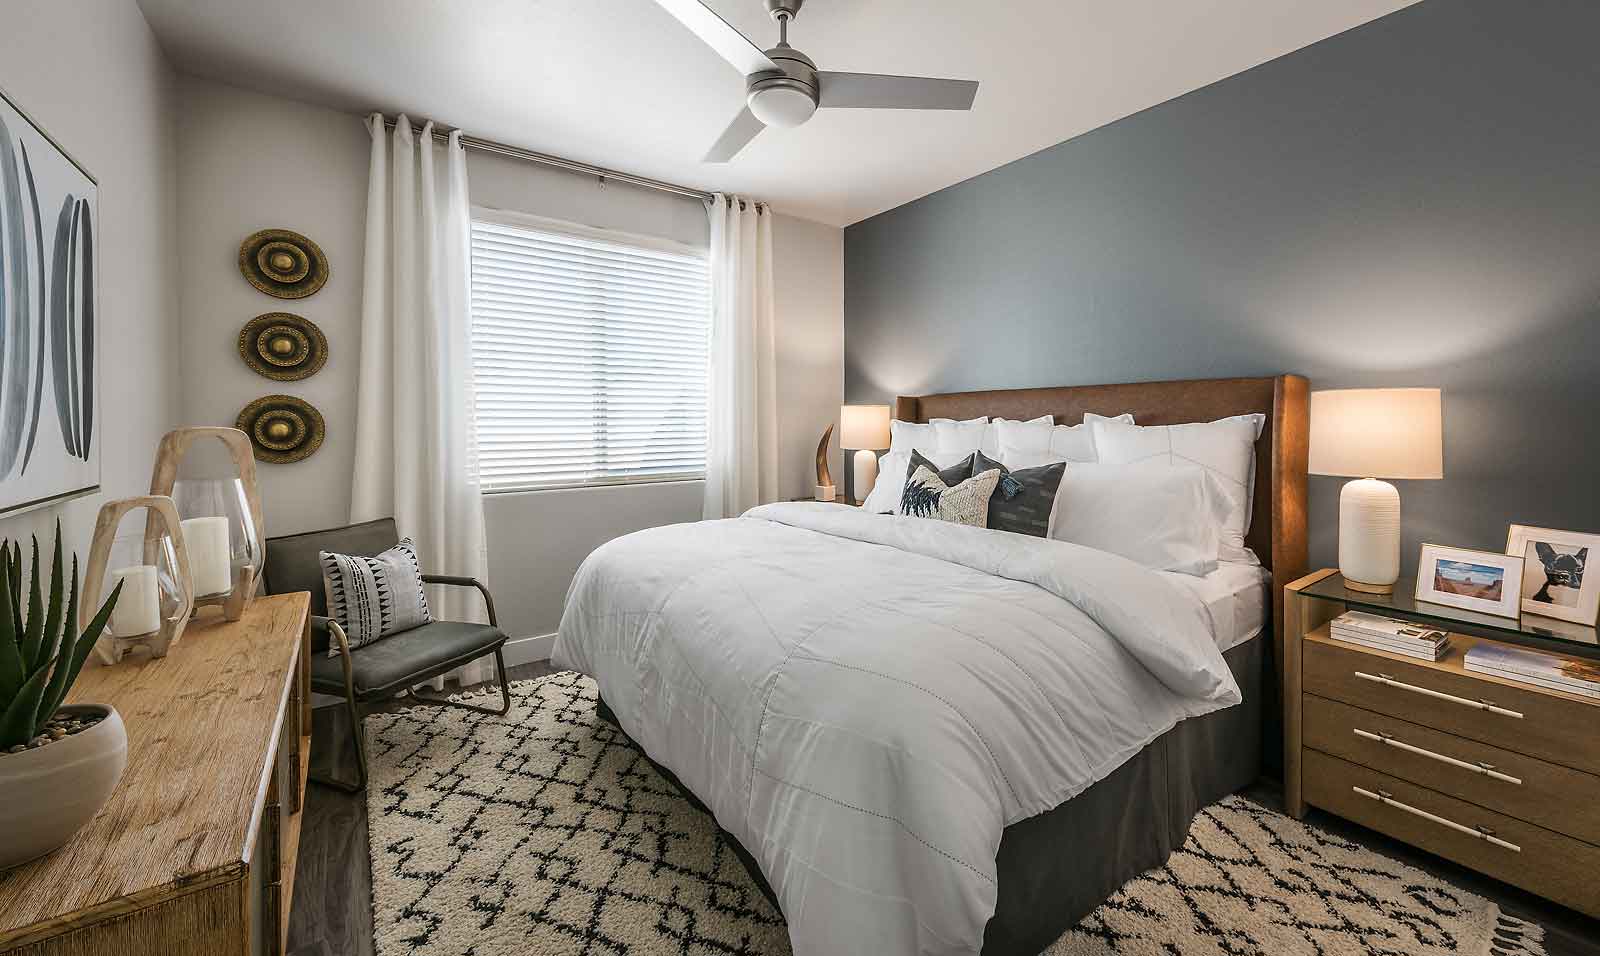 Carpeted Bedroom With Ceiling Fan at Village at Pioneer Park Apartments in Peoria, AZ